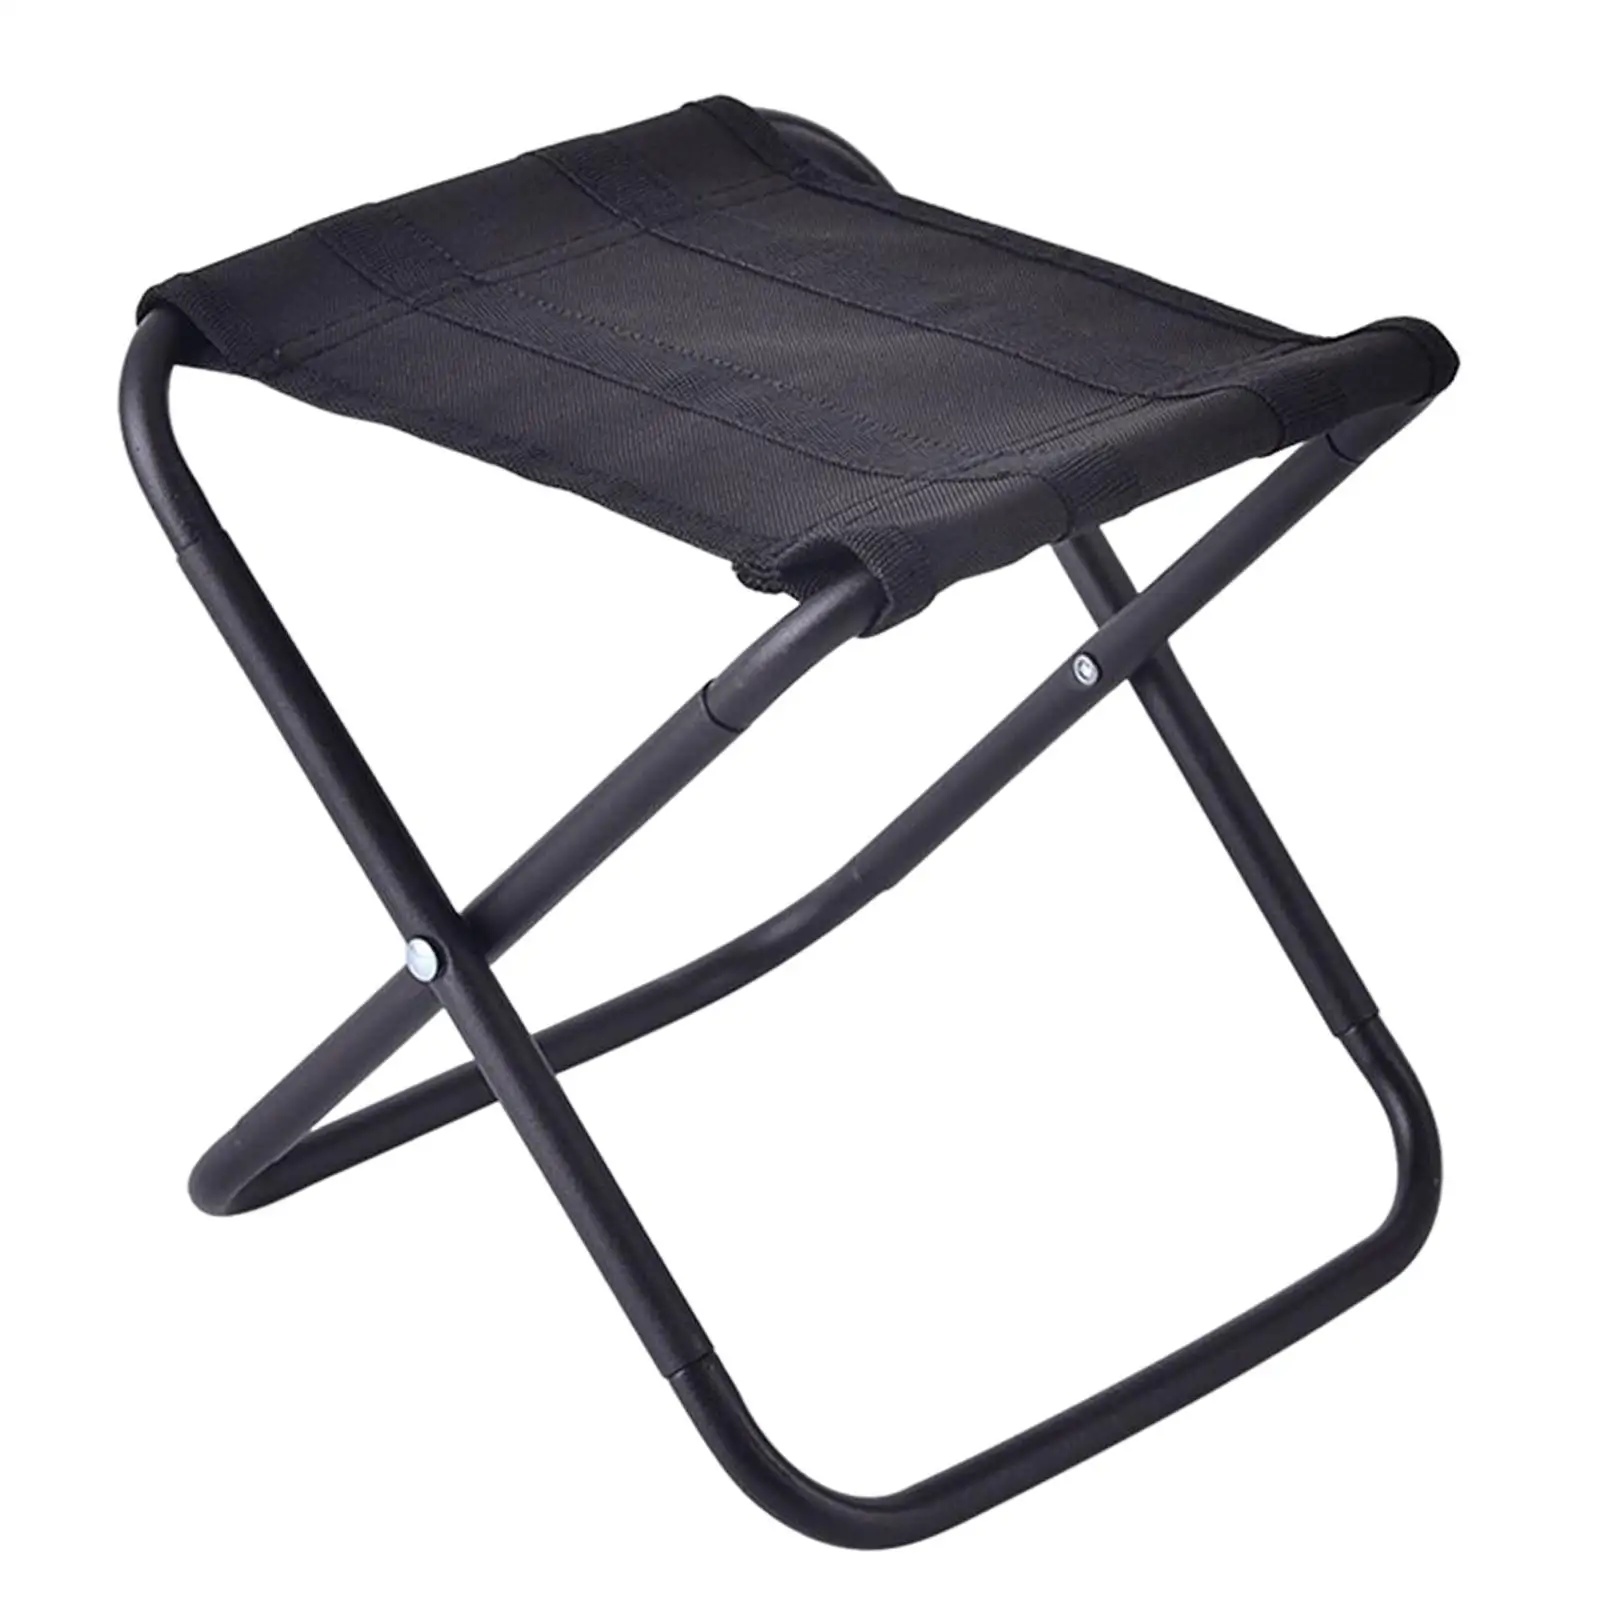 Folding Stool Outdoor Foldable Footstool for Walking Hiking Lounge Picnic